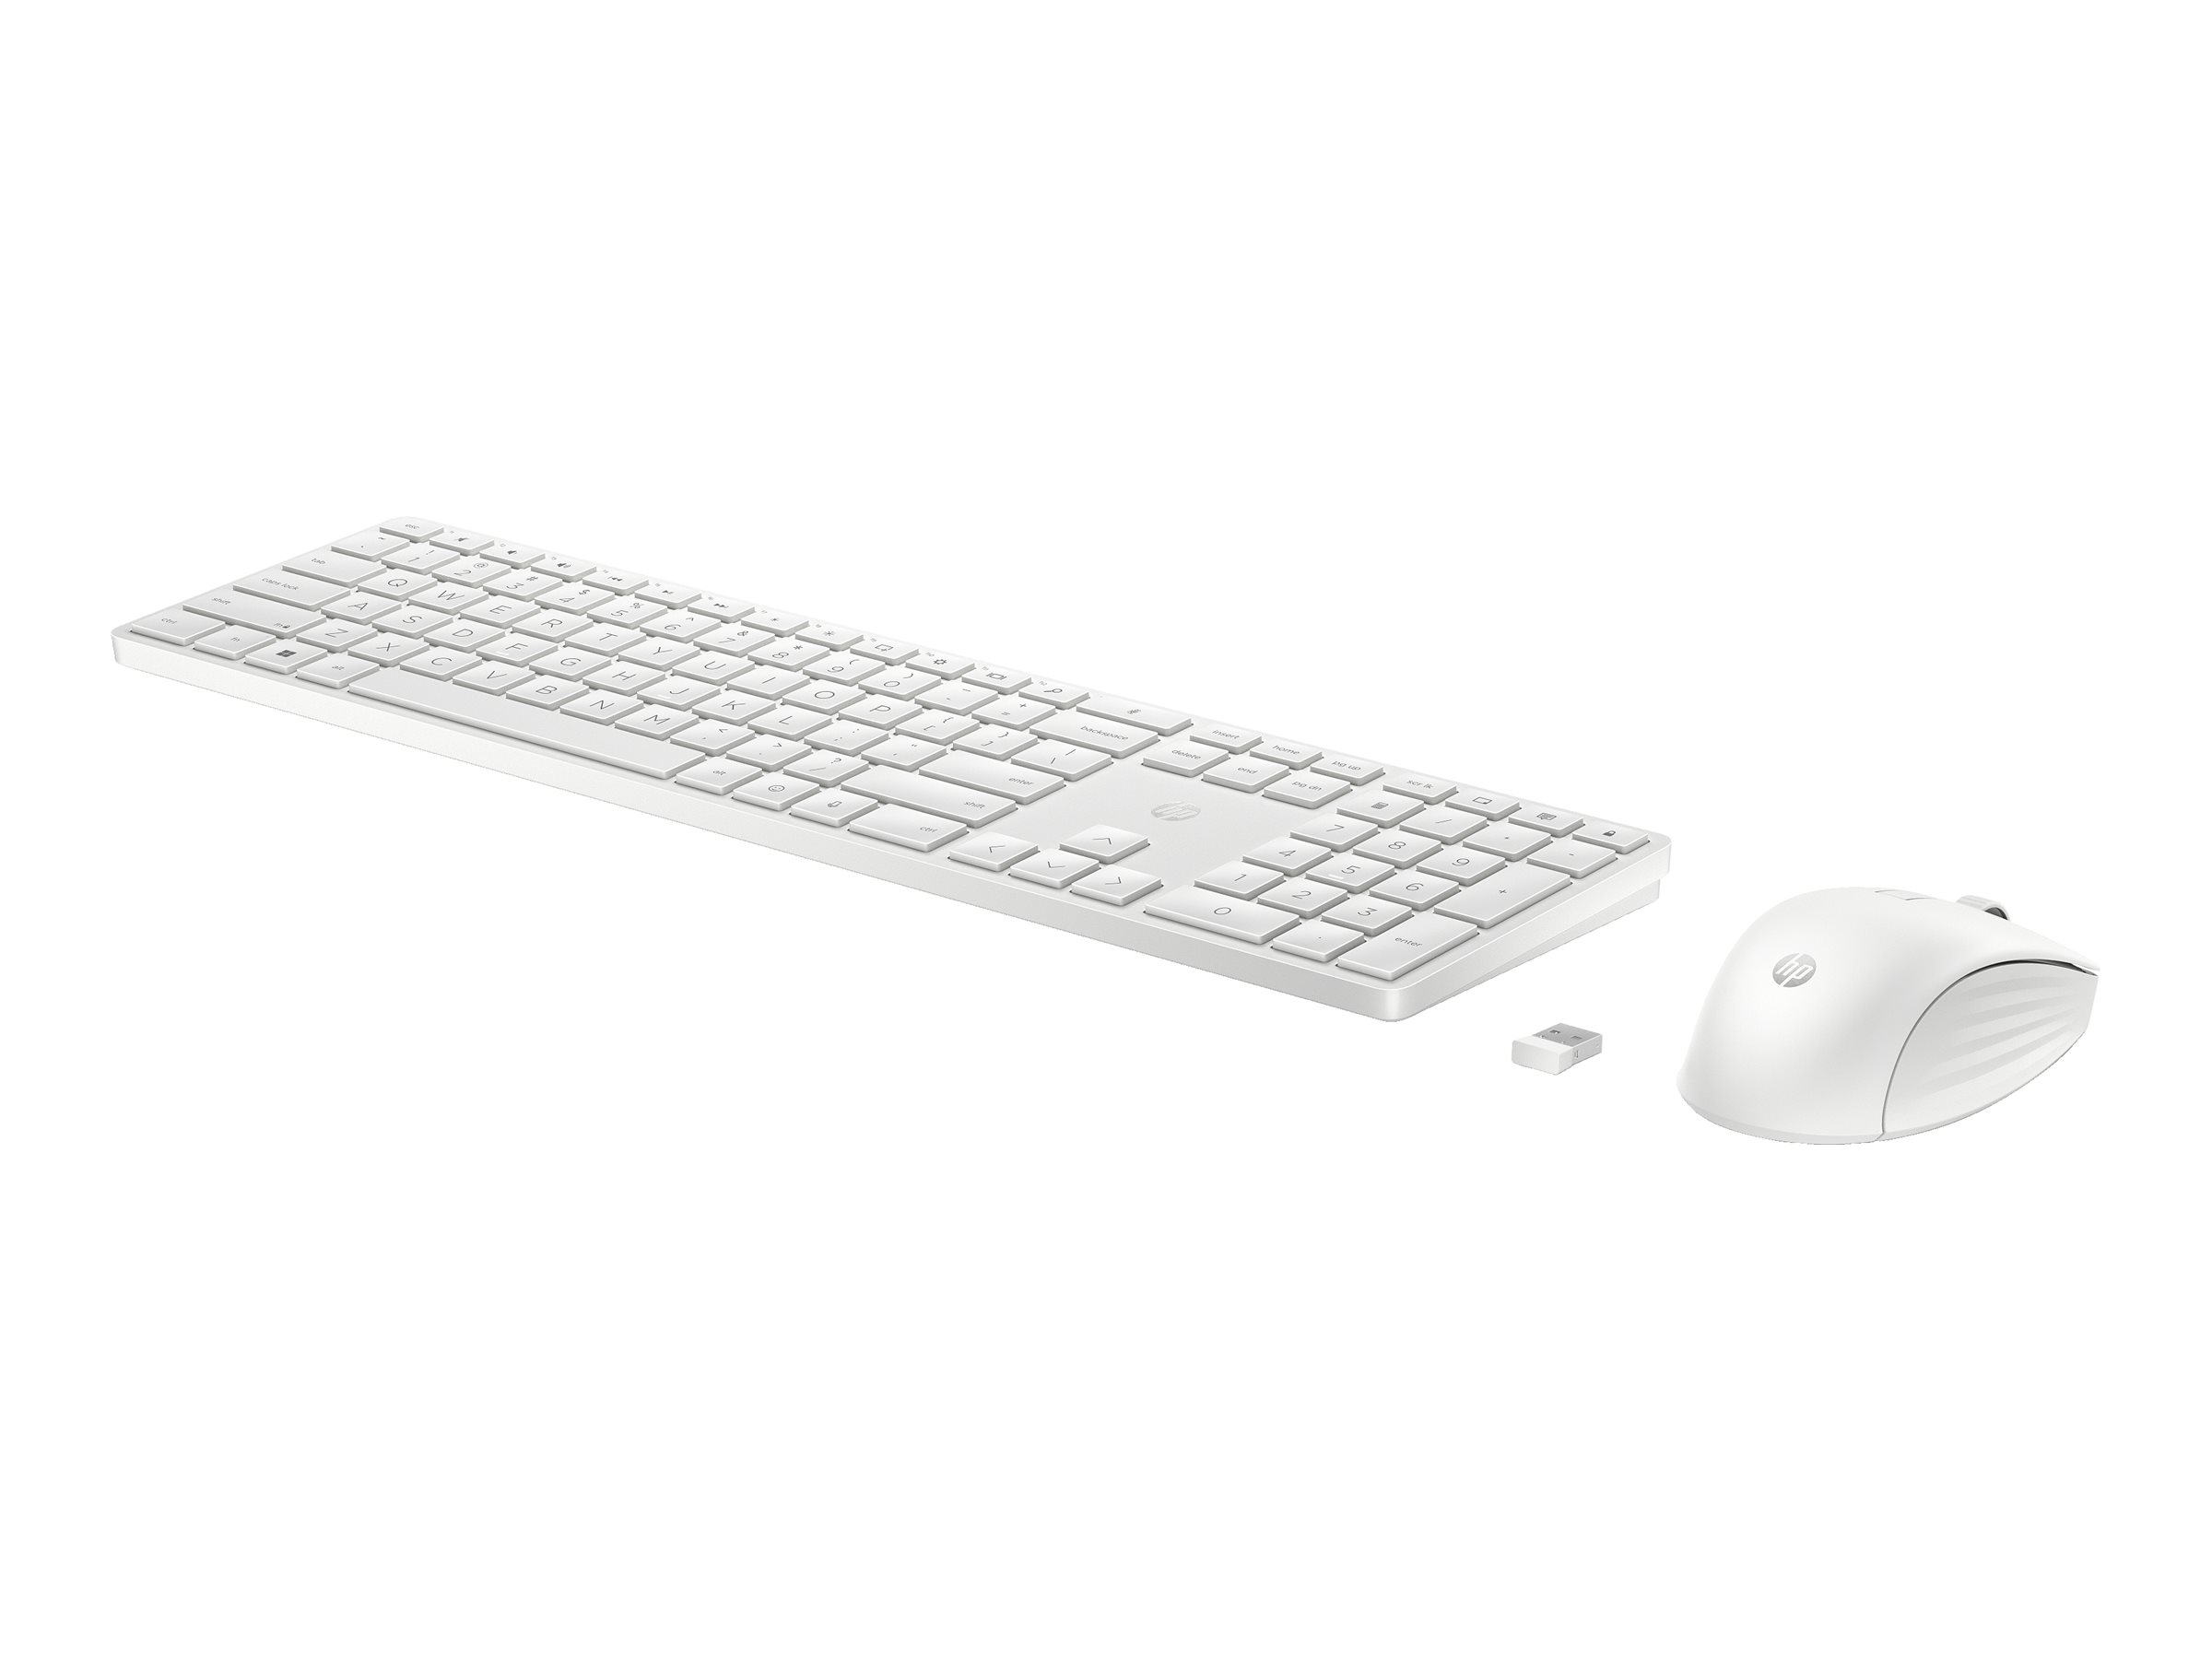 HP 655 Wireless Keyboard and Mouse Combo White (DE)